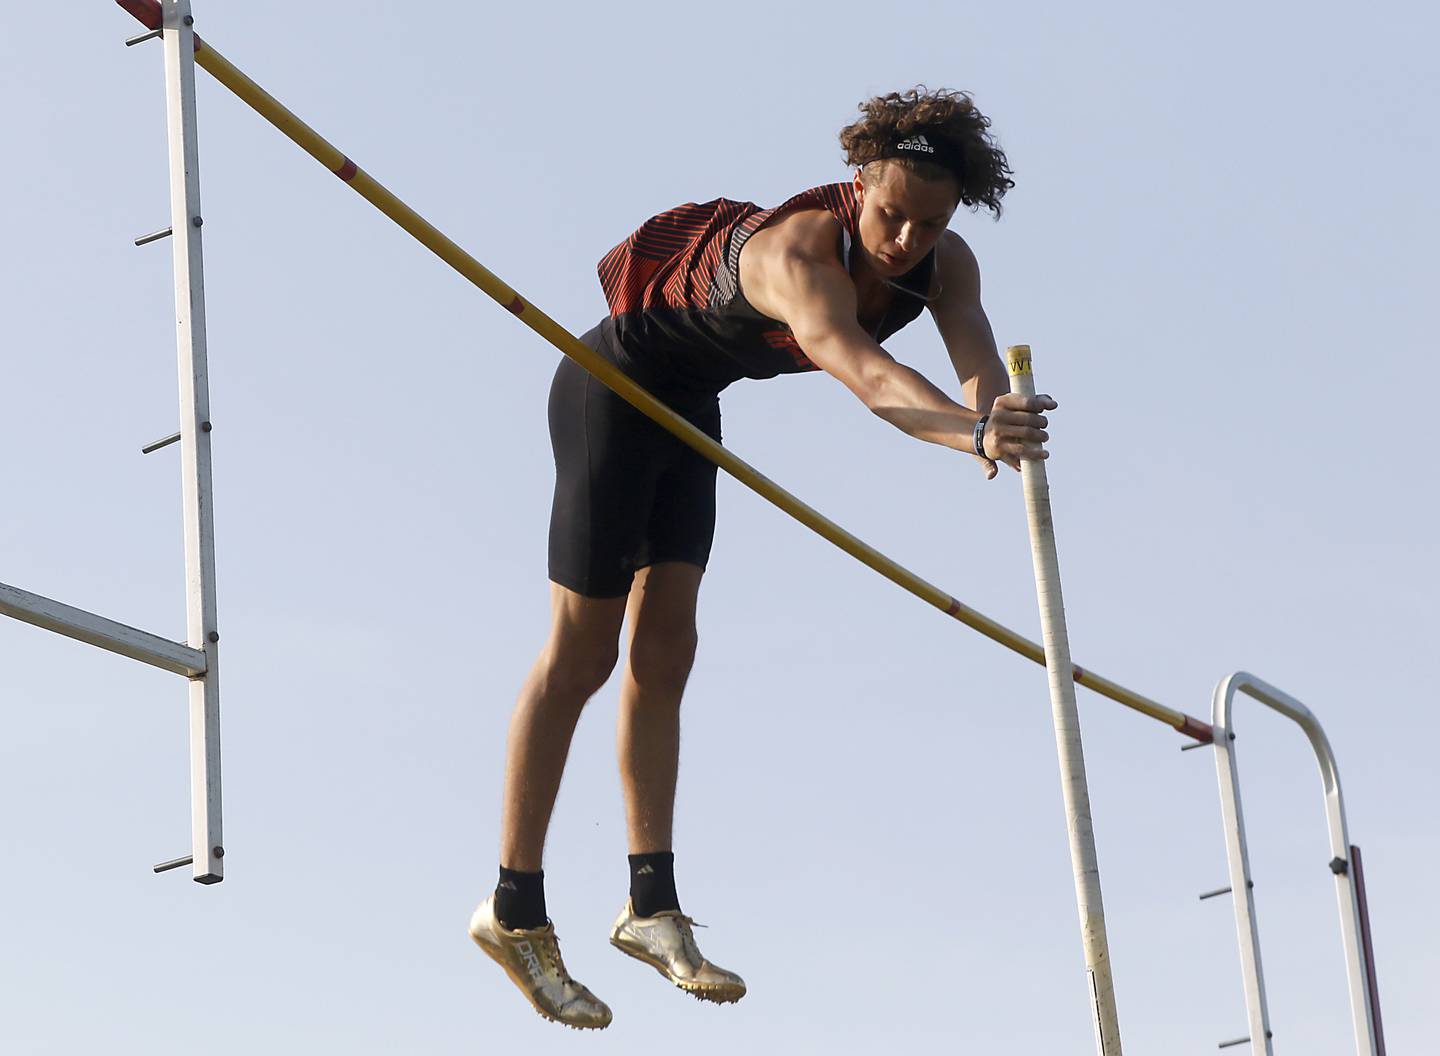 McHenry’s Zeke Galvicius competes in the pole vault during Fox Valley Conference boys track and field meet Friday, May 13, 2022, at Crystal Lake Central High School.